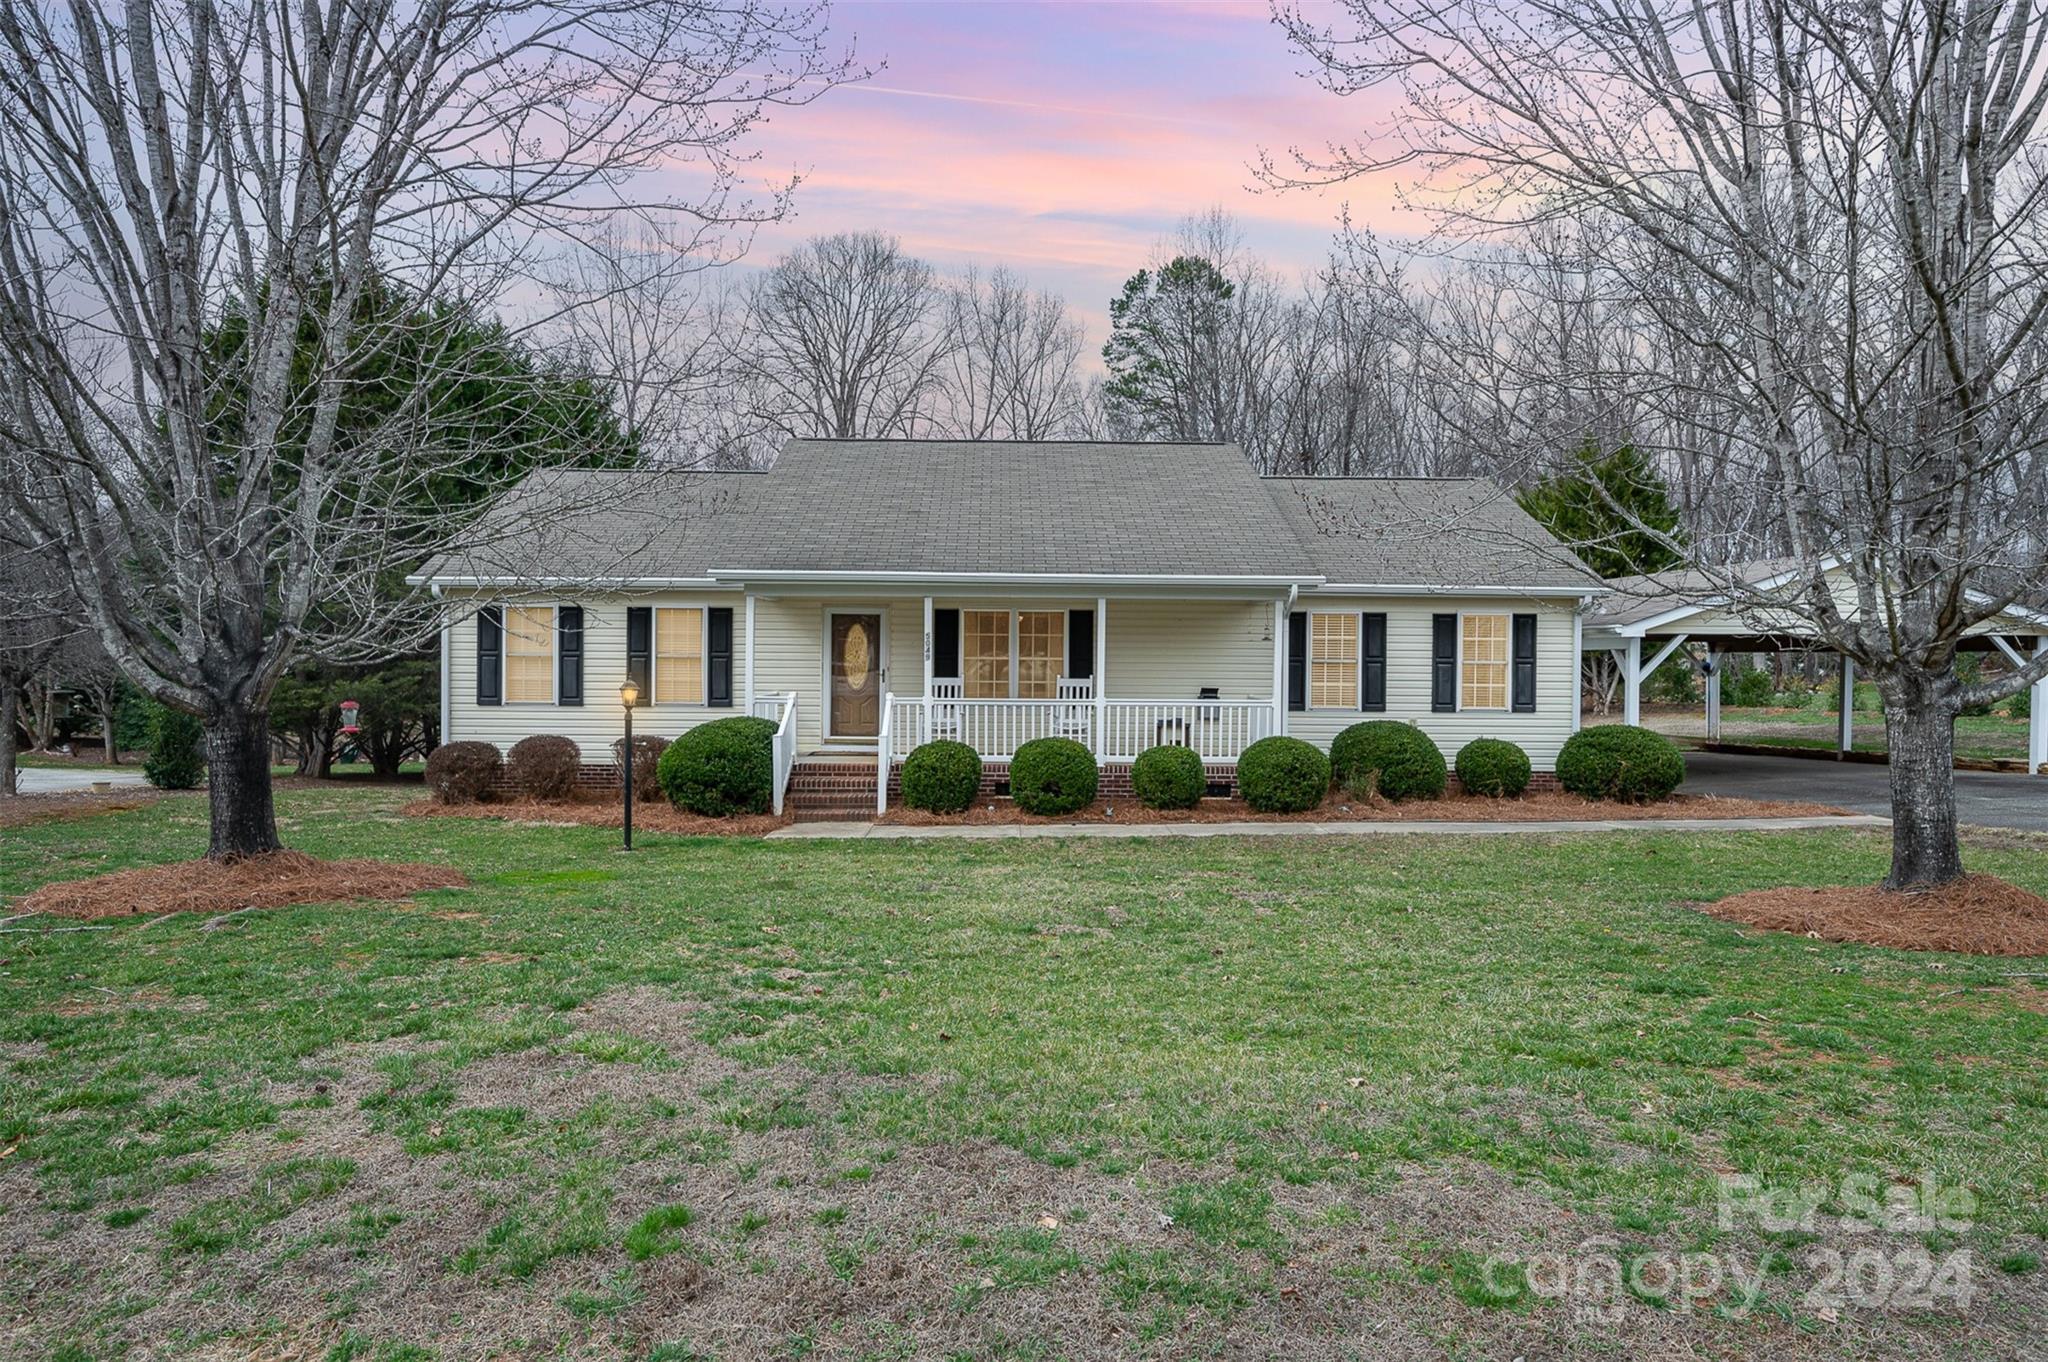 Photo one of 5049 Arden Gate Dr Iron Station NC 28080 | MLS 4109530